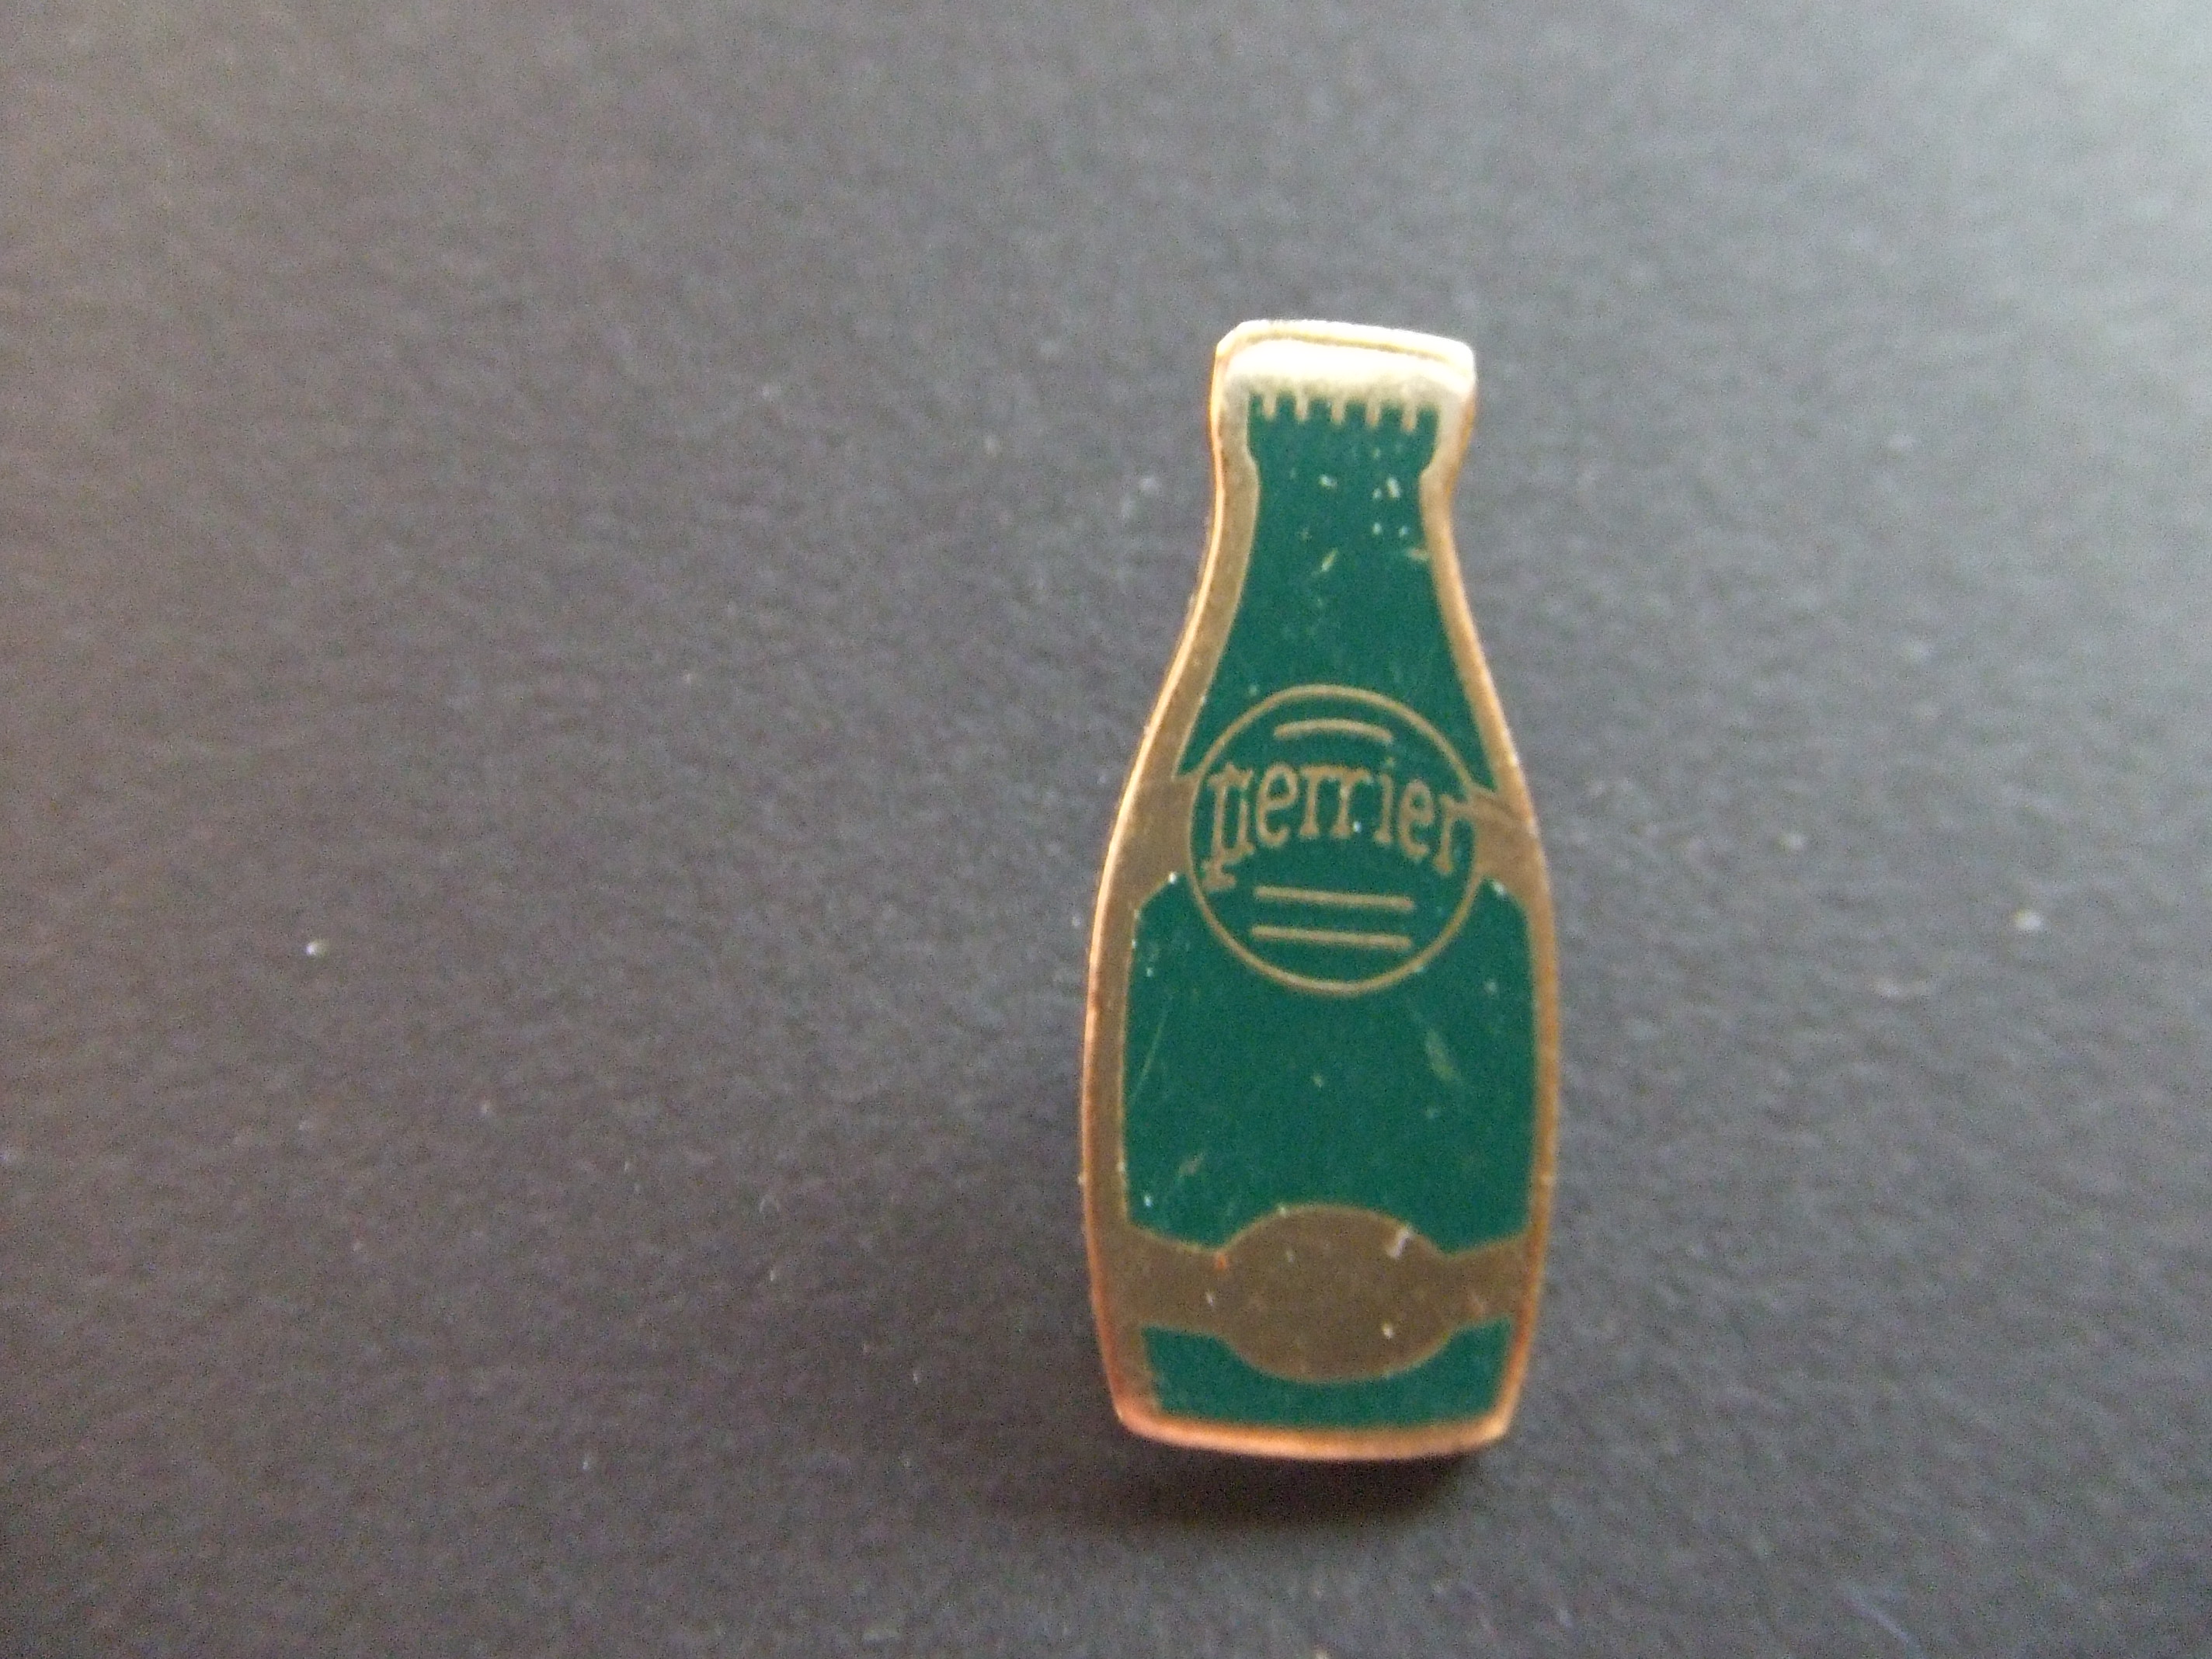 Perrier bronwater